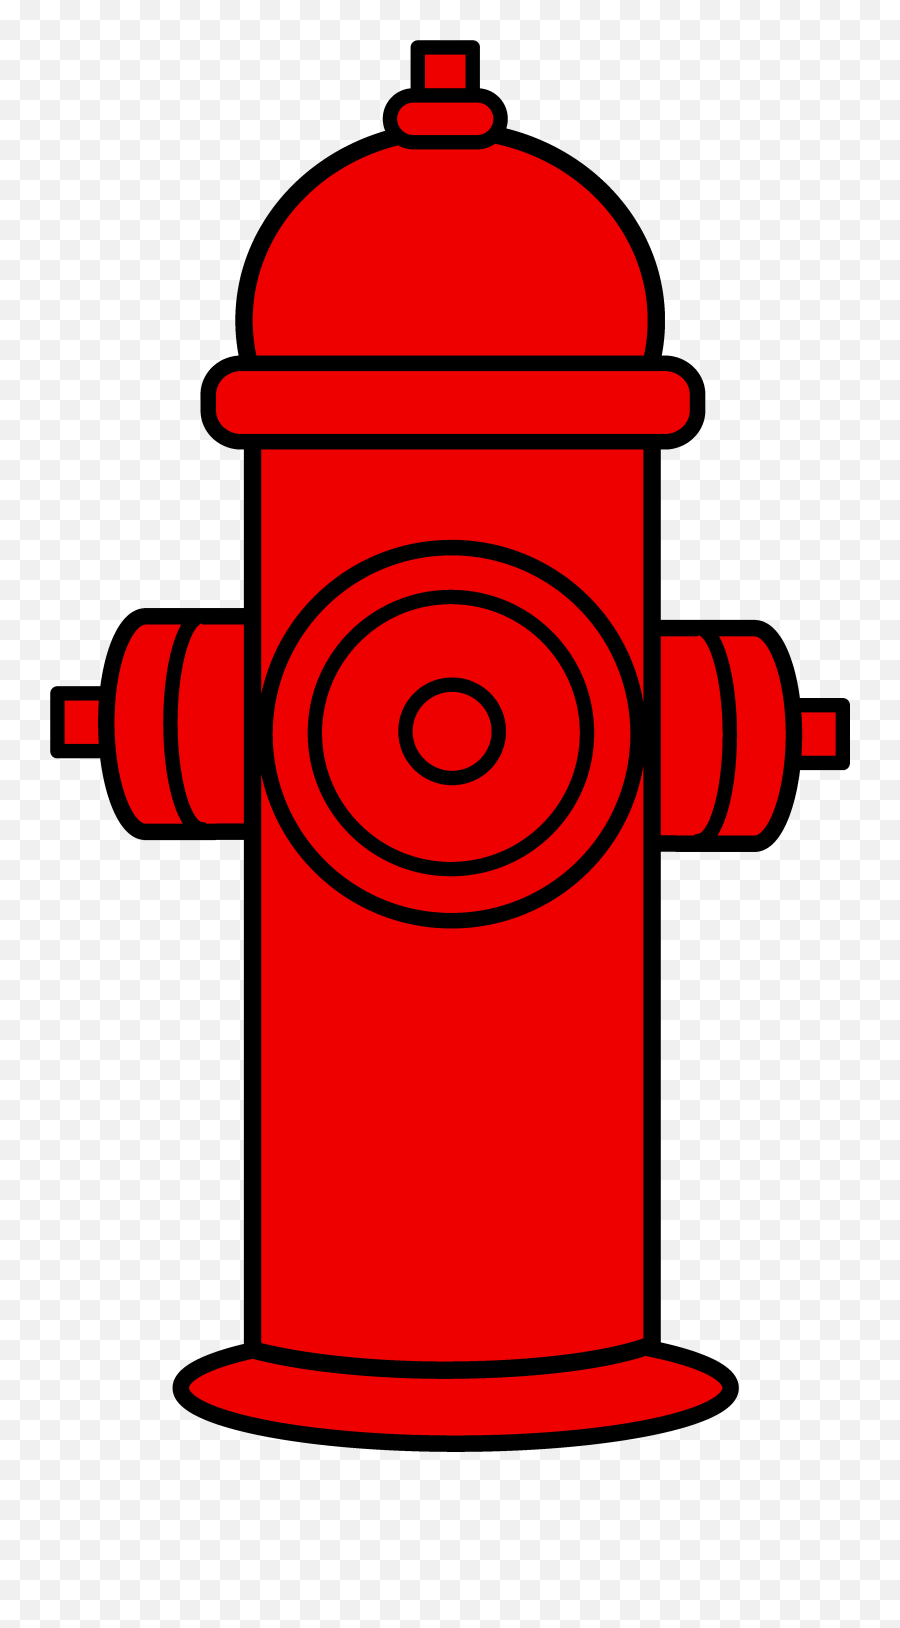 Red Fire Hydrant Fireman Party Fire Truck Party Fireman - Fire Hydrant Clipart Emoji,Firefighter Clipart